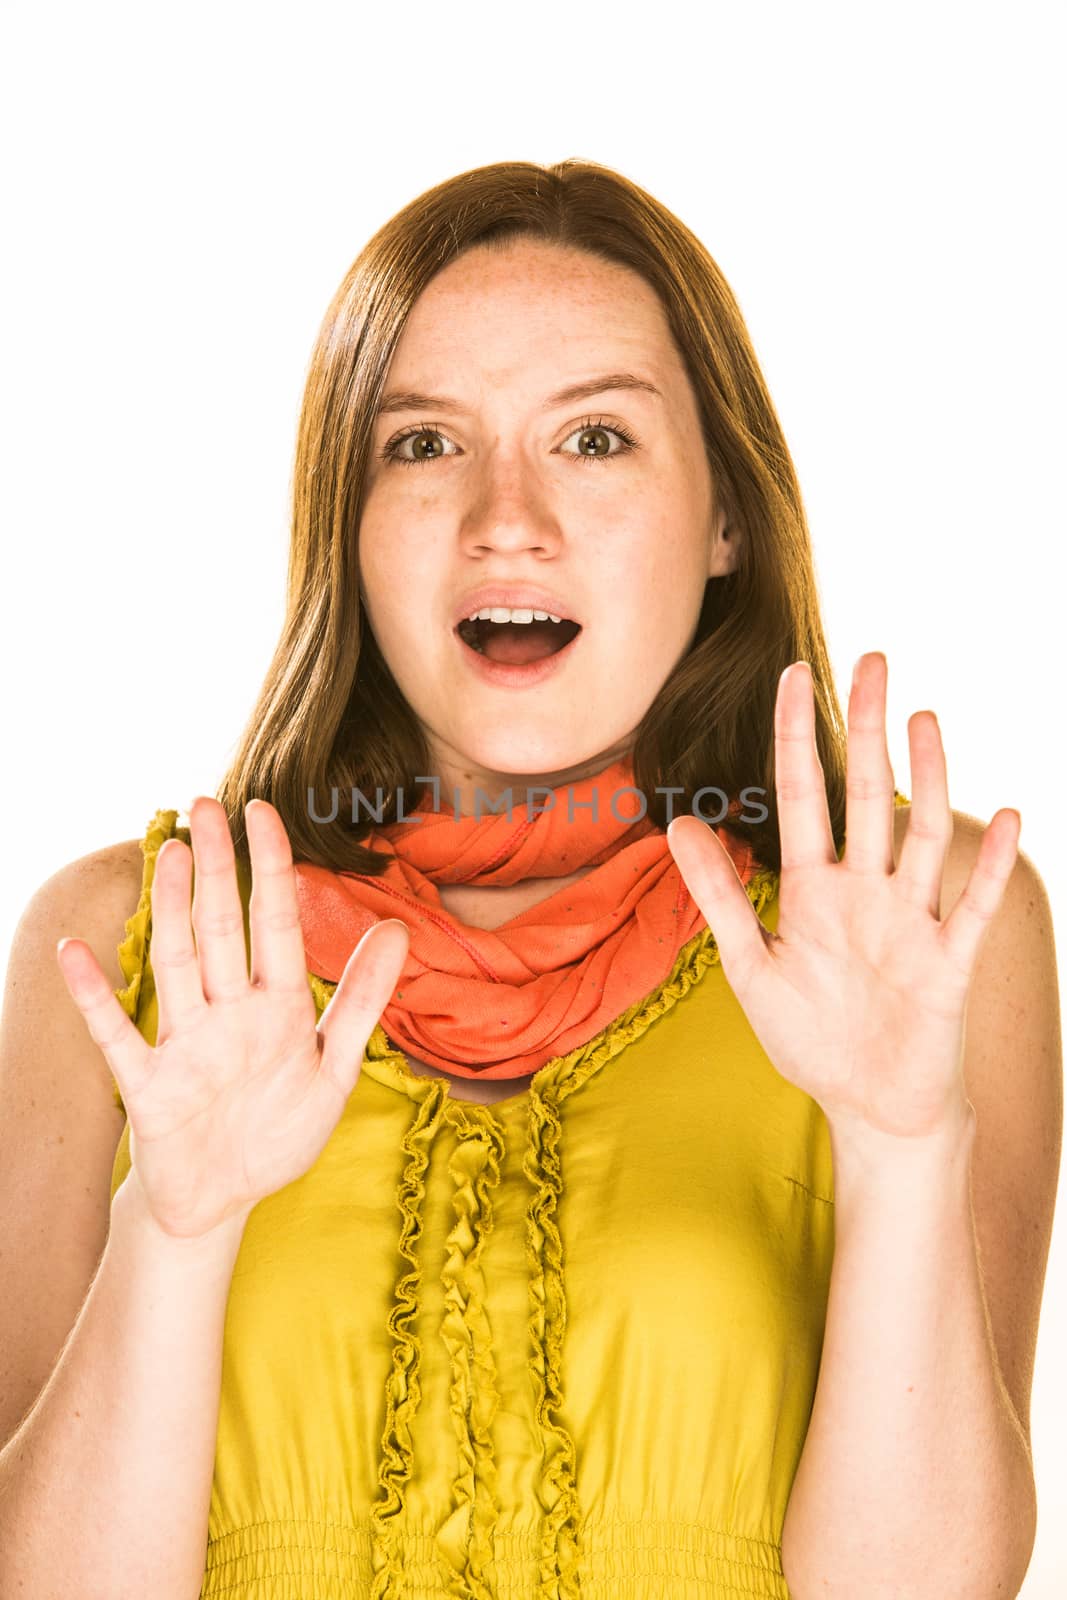 Pretty girl with a shocked expression on white background